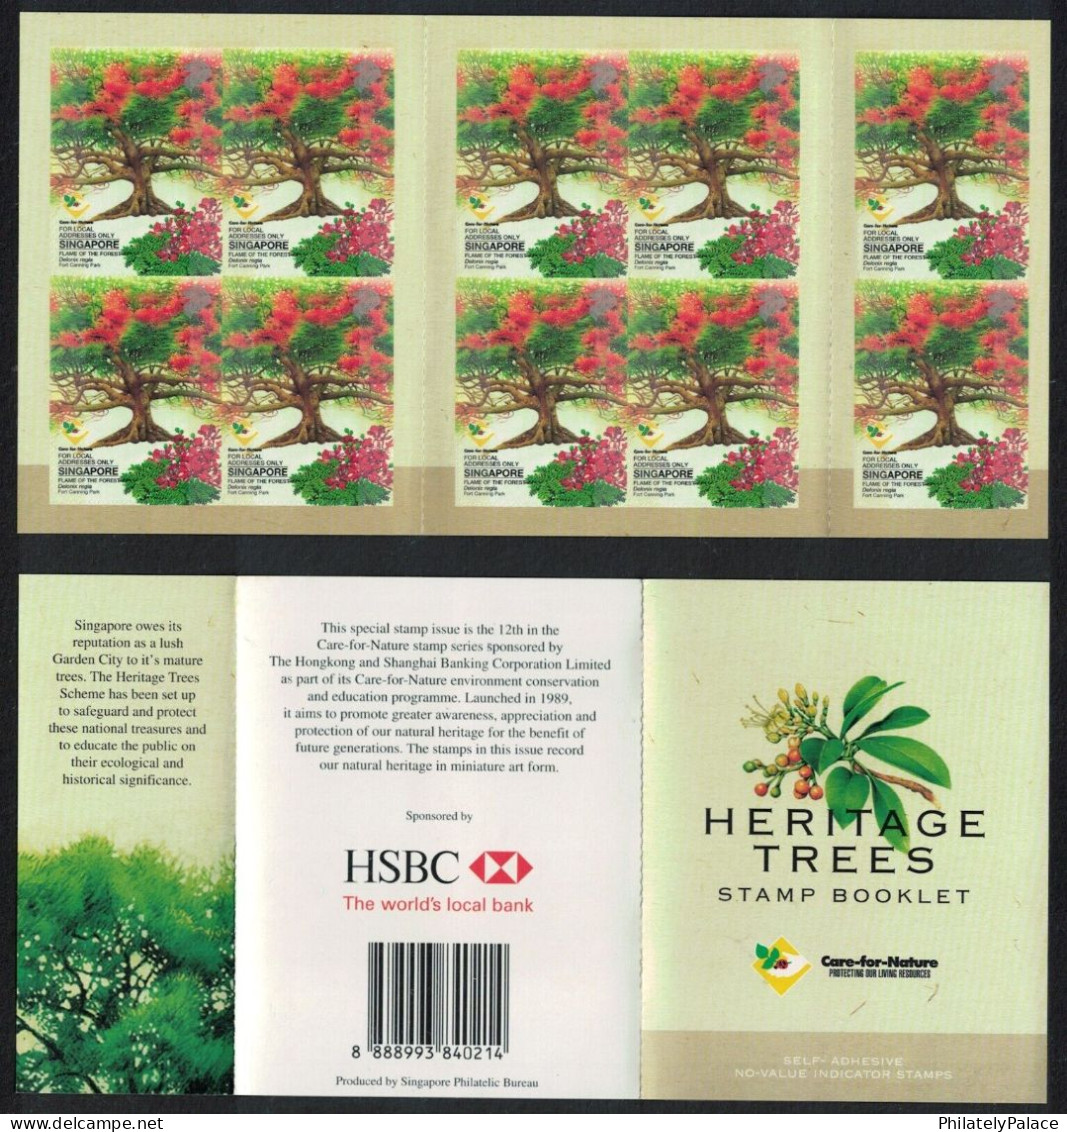 SINGAPORE 2002 HERITAGE TREES CARE FOR NATURE SERIES,HSBC BANK, BOOKLET OF 10 STAMPS MNH (**) - Singapur (1959-...)